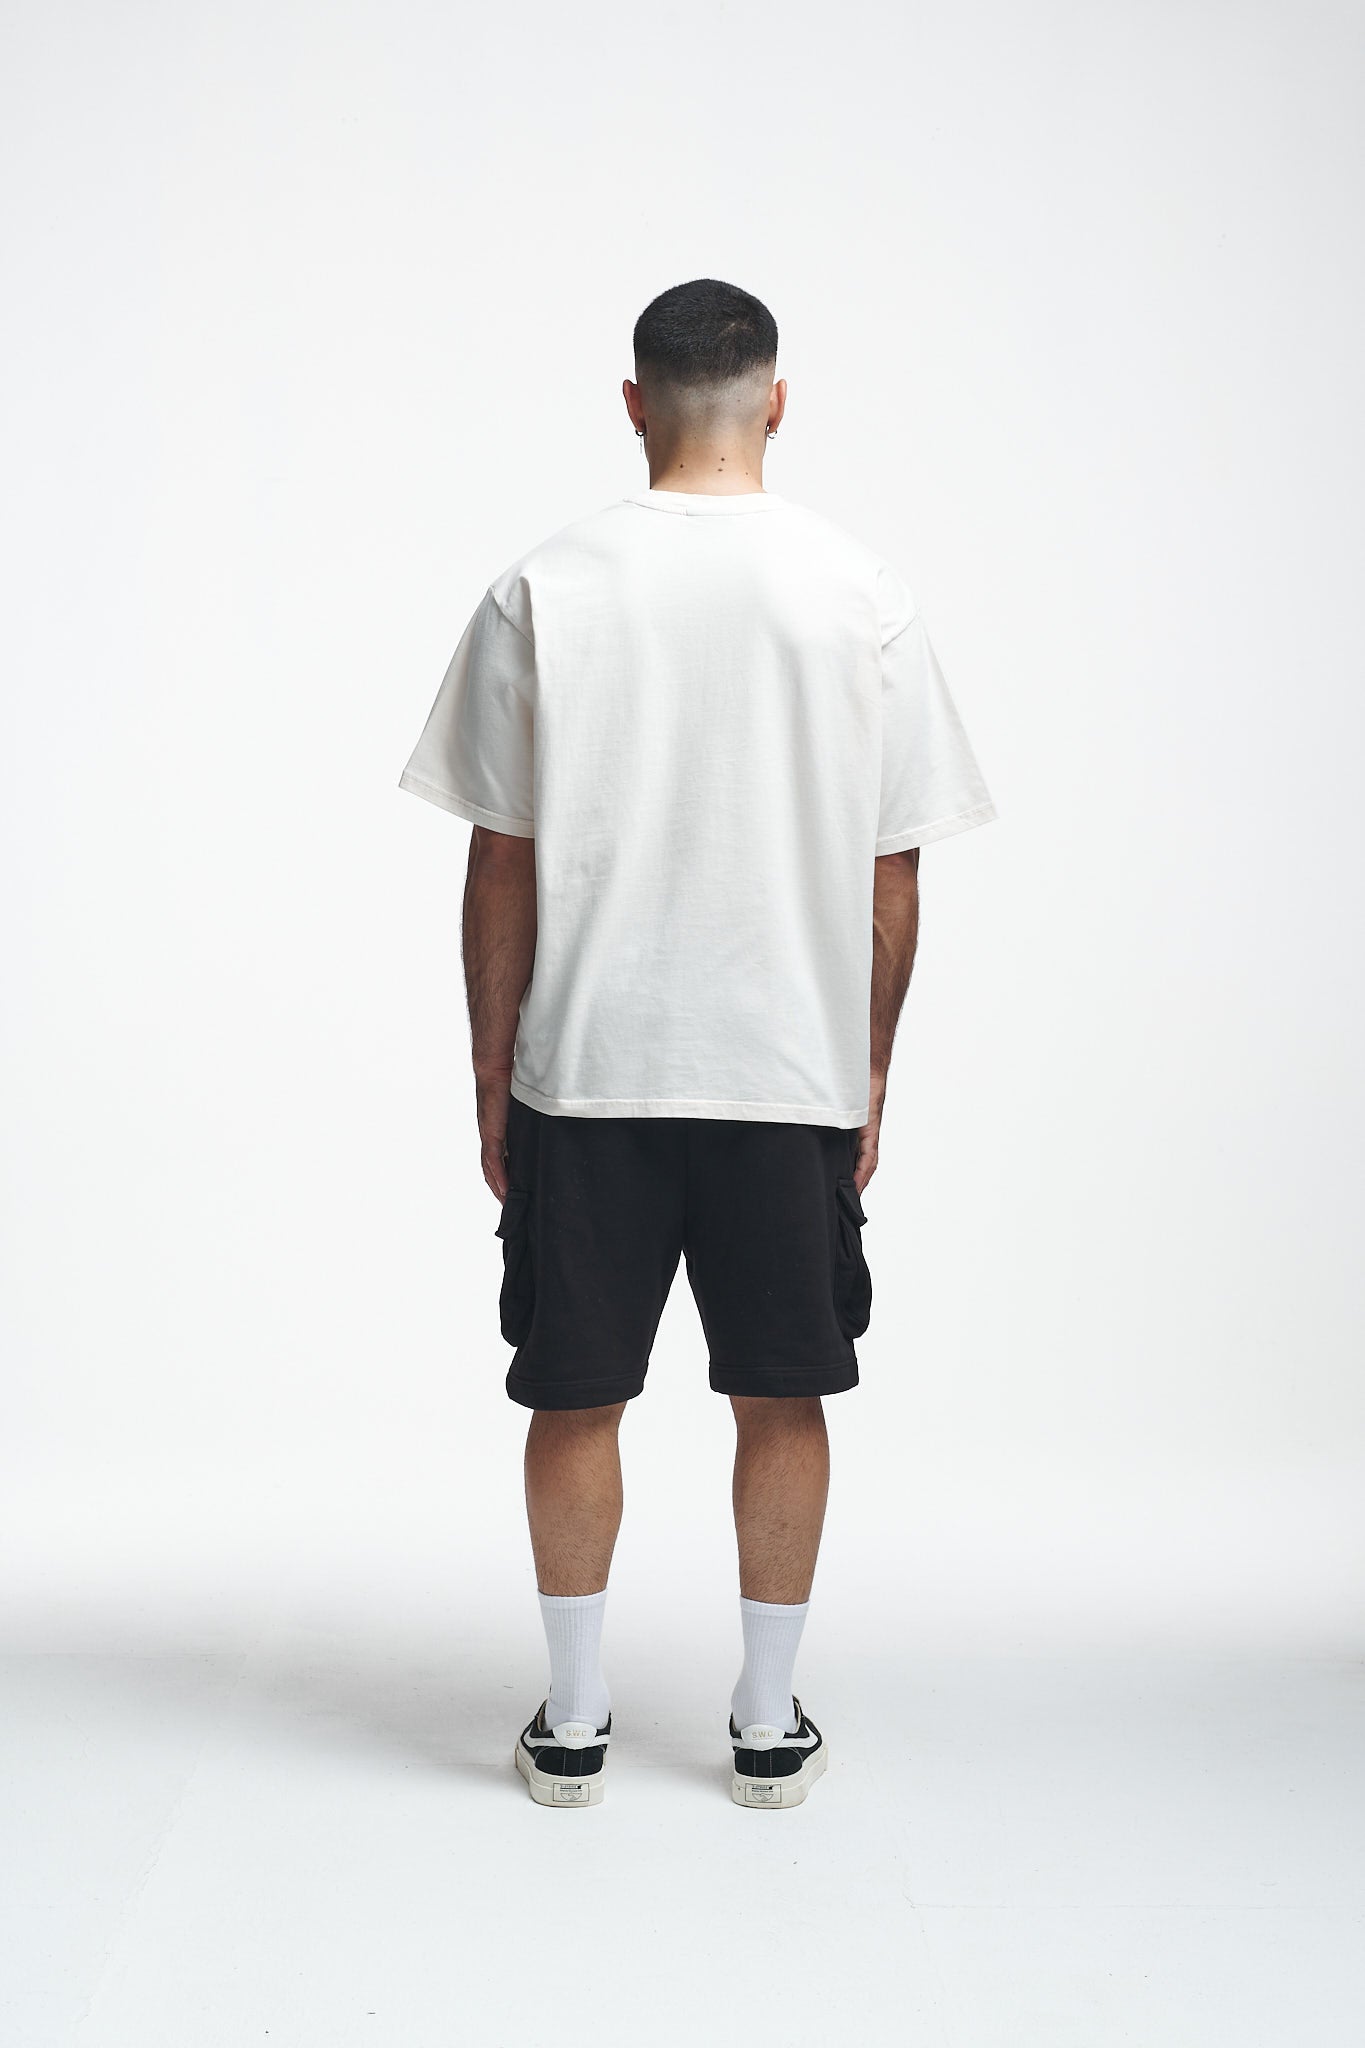 Less Scrolling Oversize Tee Off White